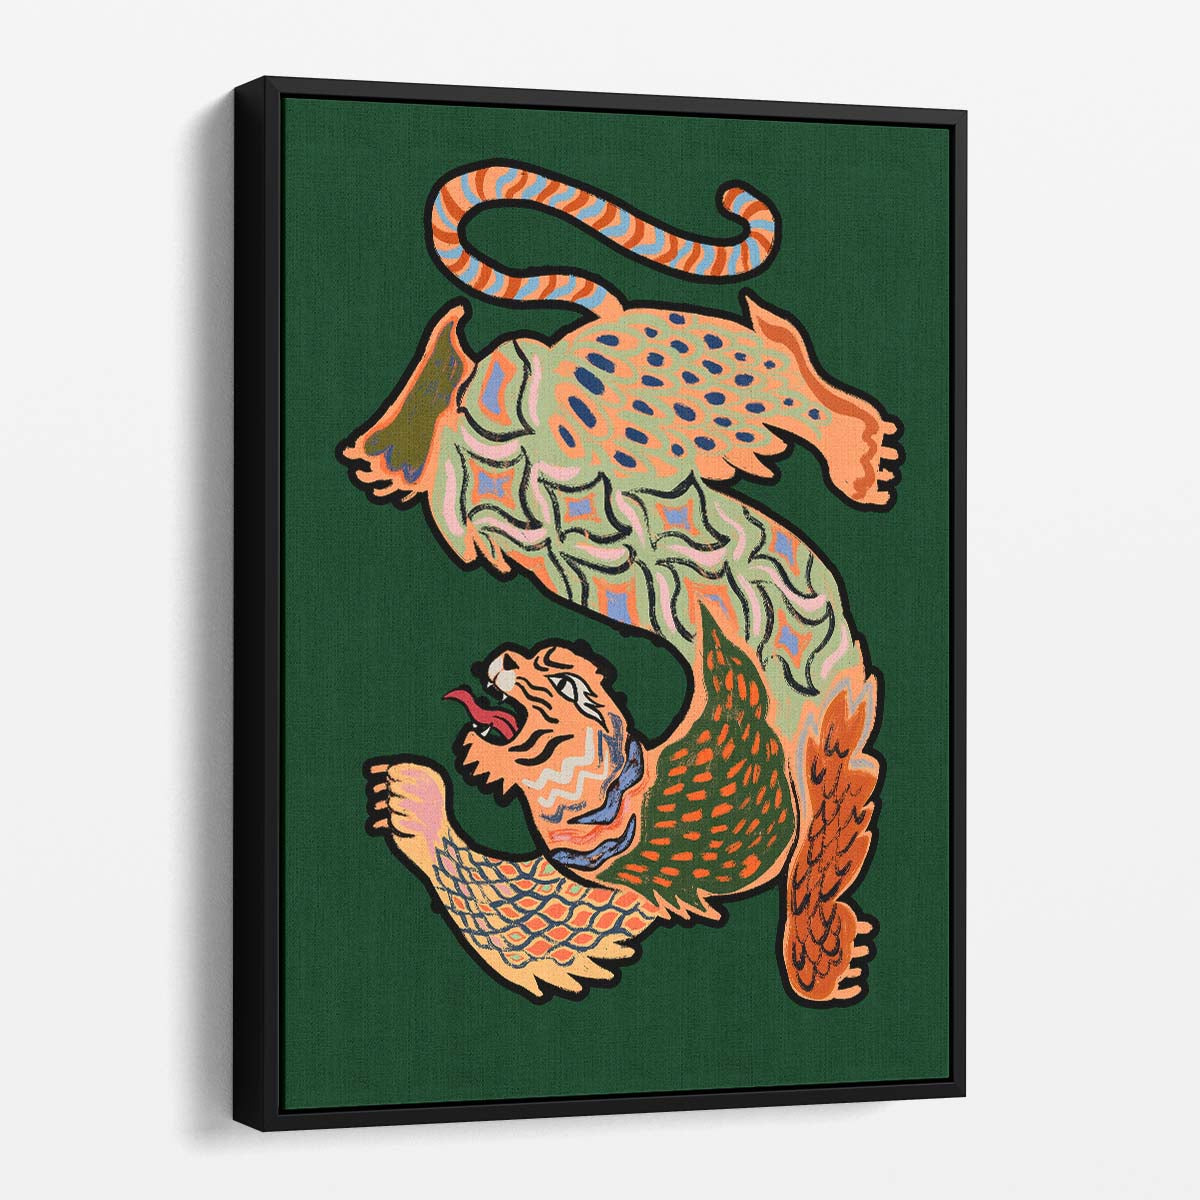 Abstract Geometric Tiger Illustration, Colorful Boho Animal Wall Art by Luxuriance Designs, made in USA